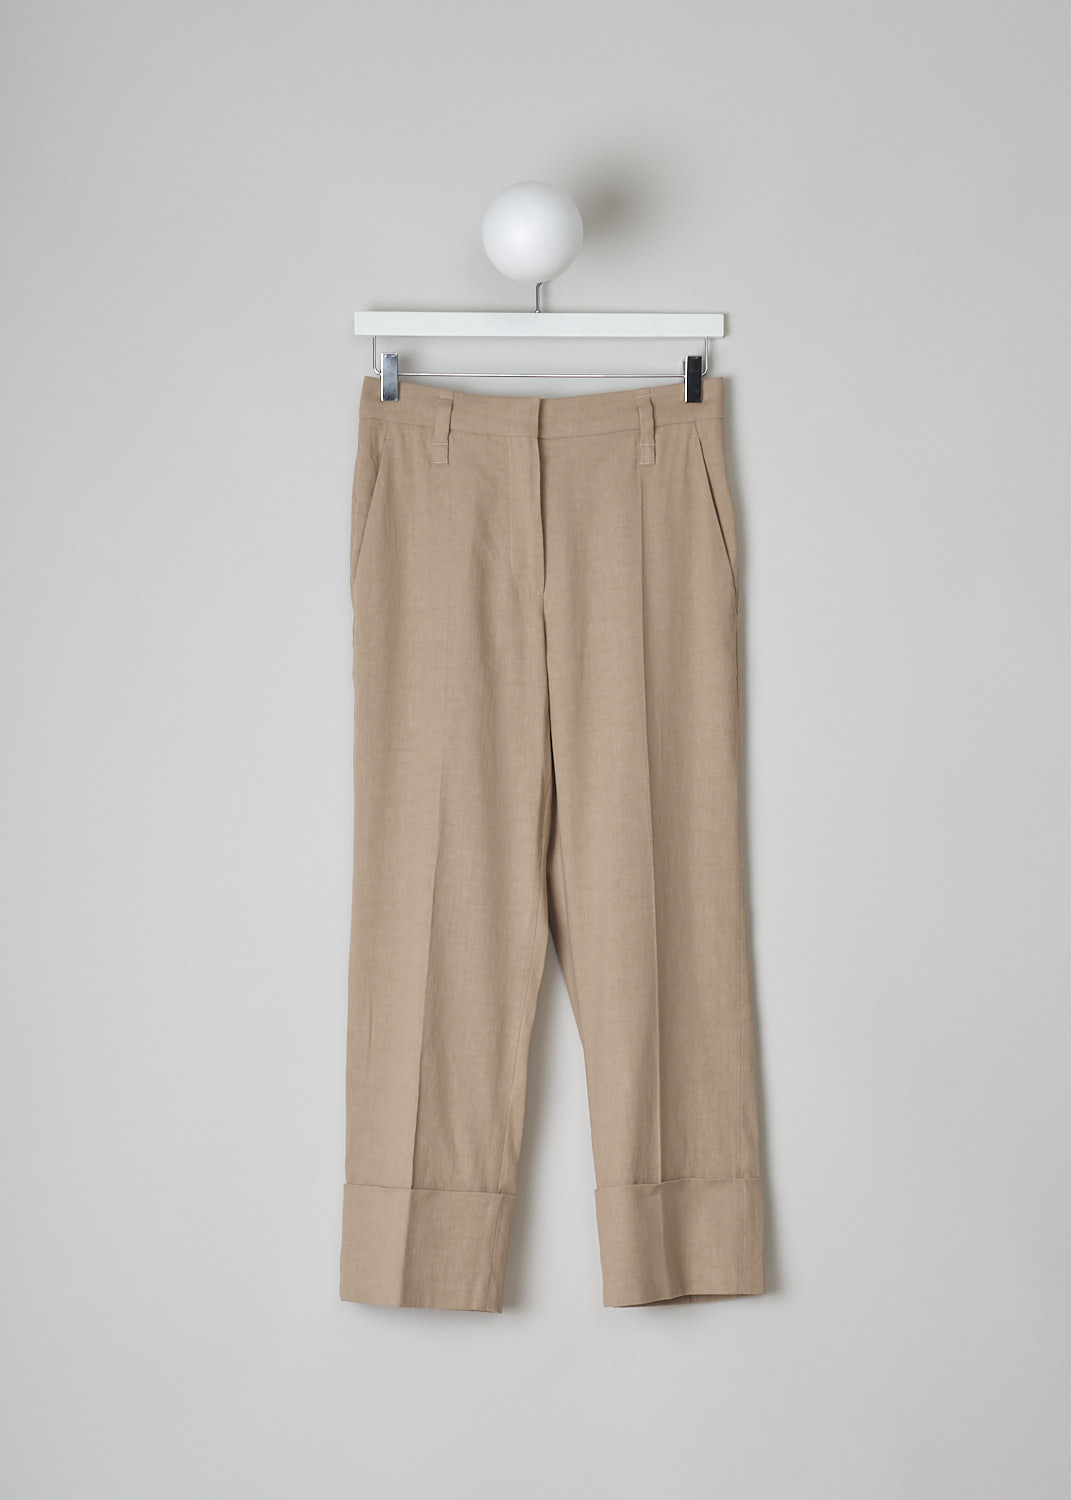 BRUNELLO CUCINELLI, DUSKY PINK LINEN-BLEND PANTS, MF591P7231_C7914, Pink, Front, These dusky pink linen-blend pants have a waistband with belt loops and a concealed clasp and zip closure. The pants have tapered pant legs with pressed centre creases and a broad folded hem. These pants have slanted pockets in the front and welt pockets in the back.
